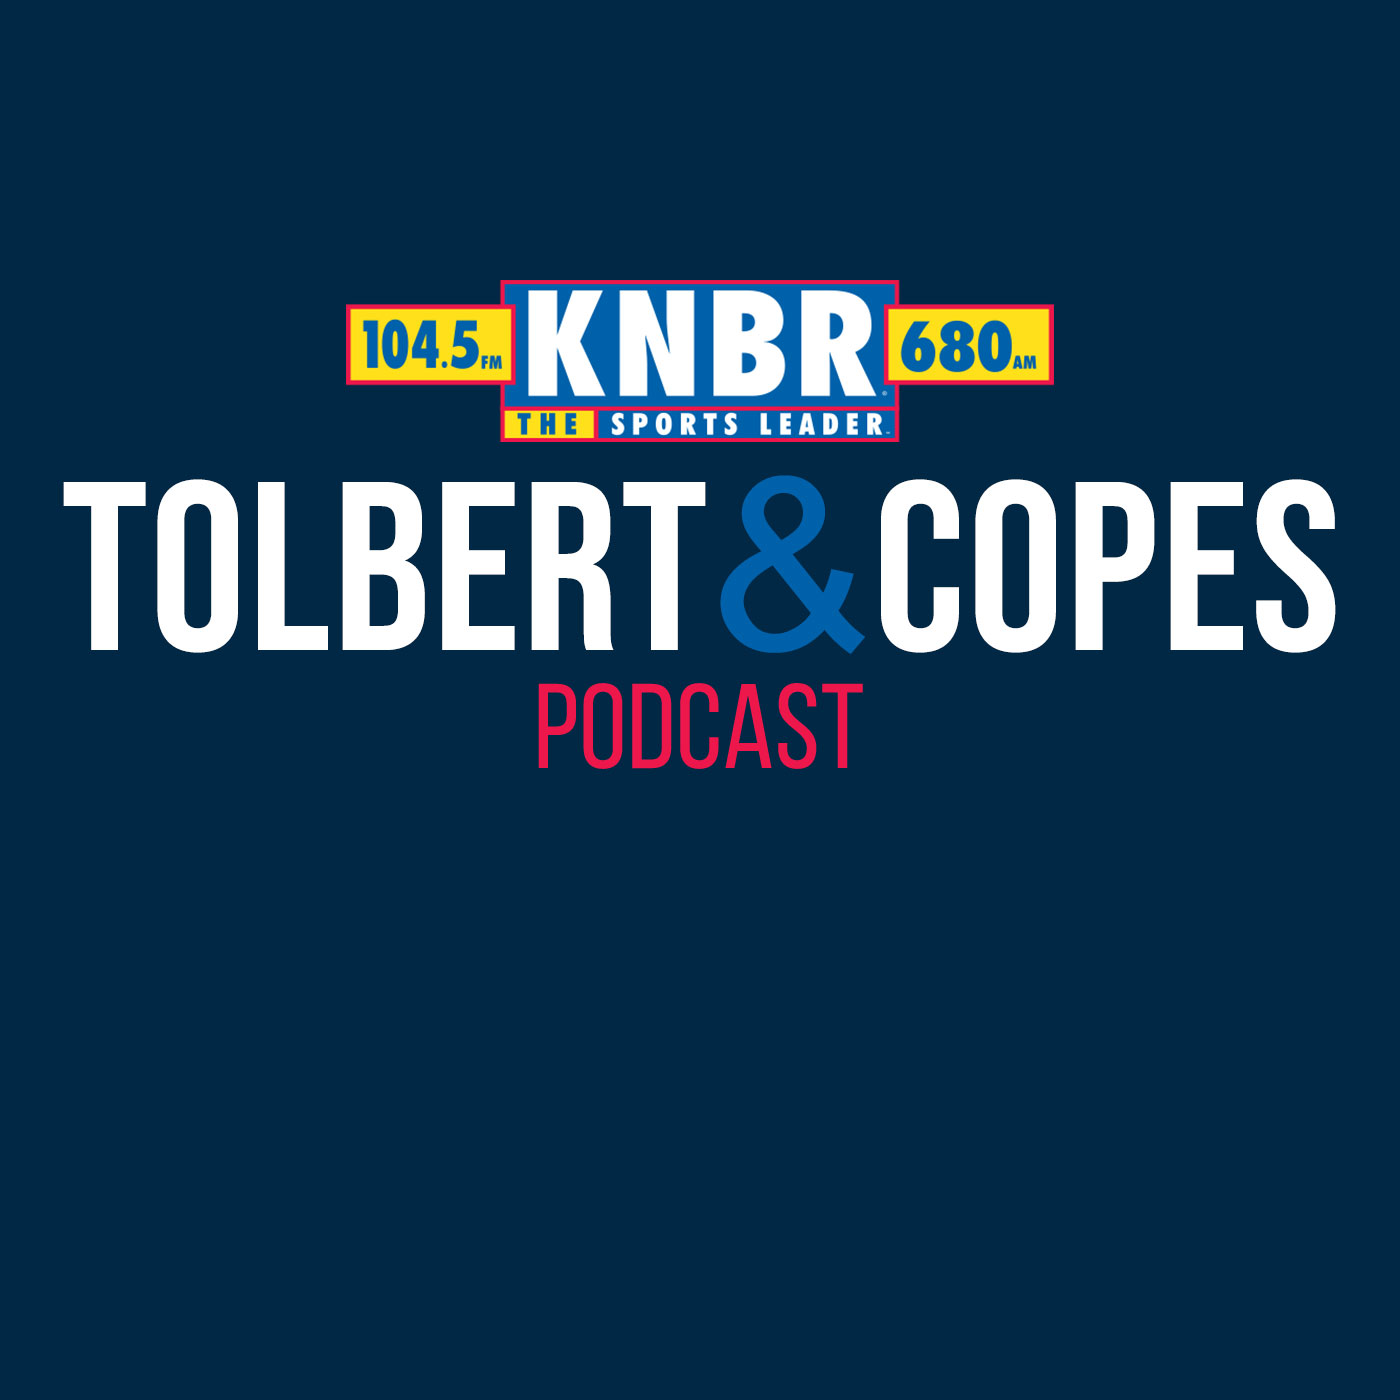 4-23 Tolbert & Copes Hour 1: Would You Rather Trade Aiyuk or Deebo?